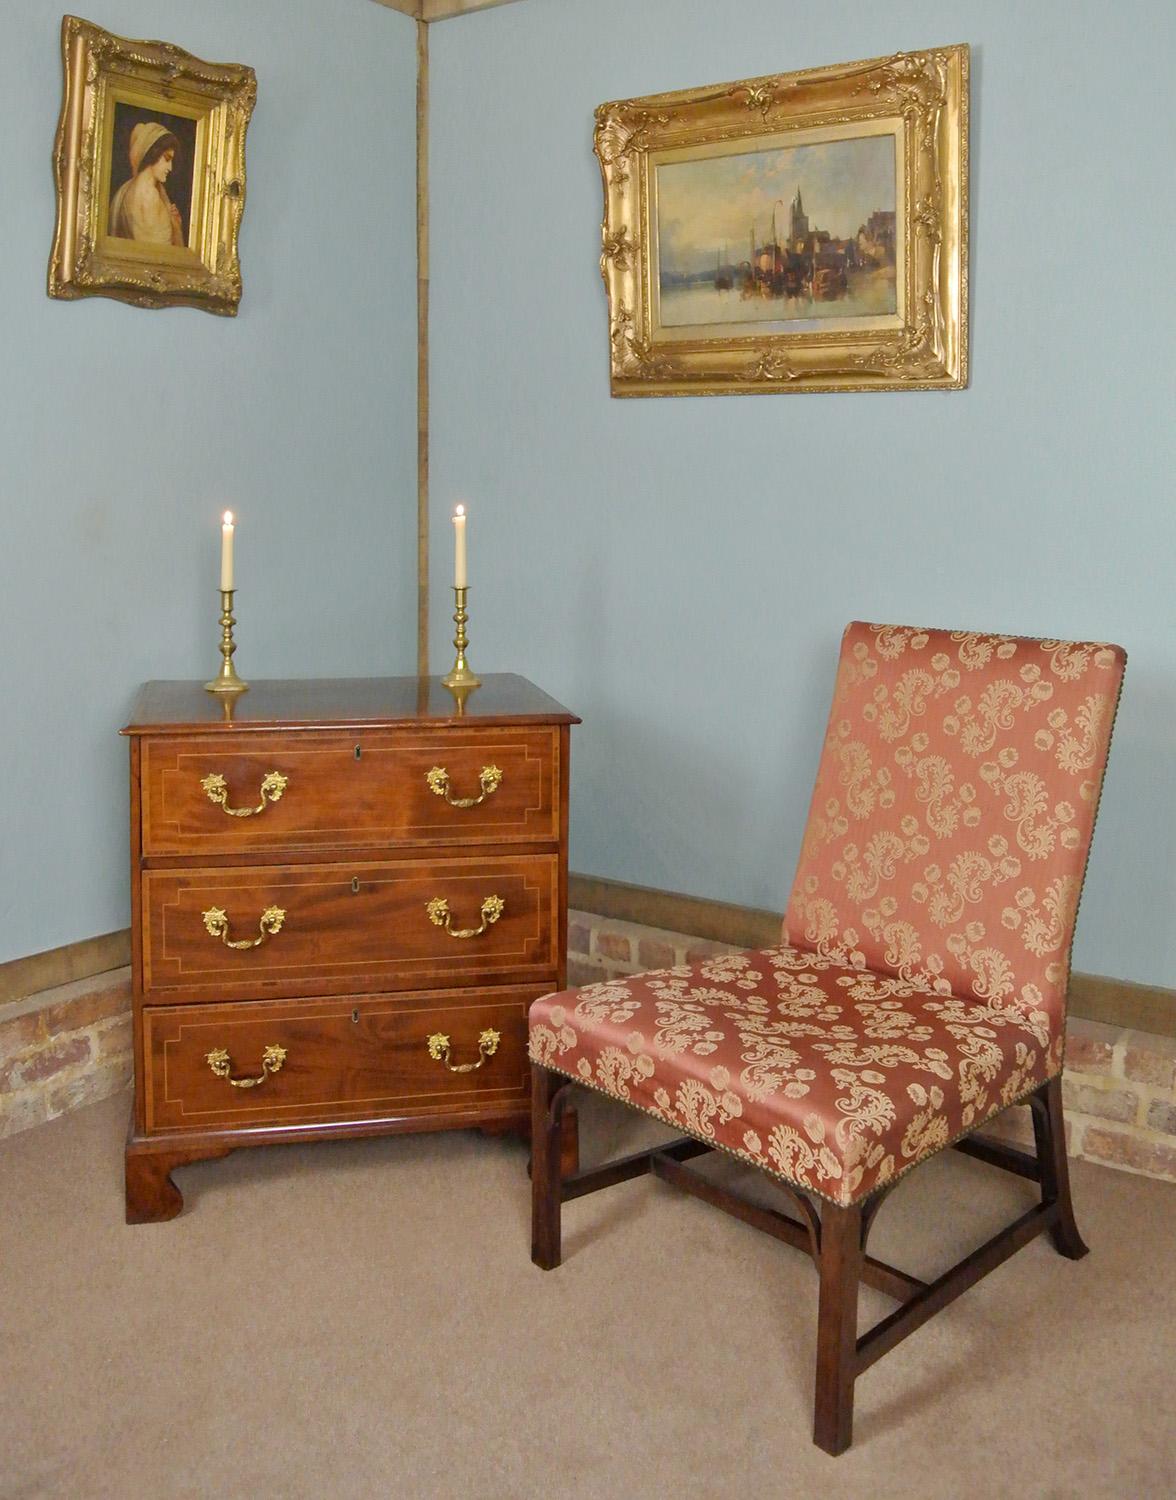 A very unusual and rare George III side chair made in solid teak and in excellent original condition, the hand carved spandrels original also and with a beautiful warm and rich well developed colour to the teak frame.

The chair is solid without